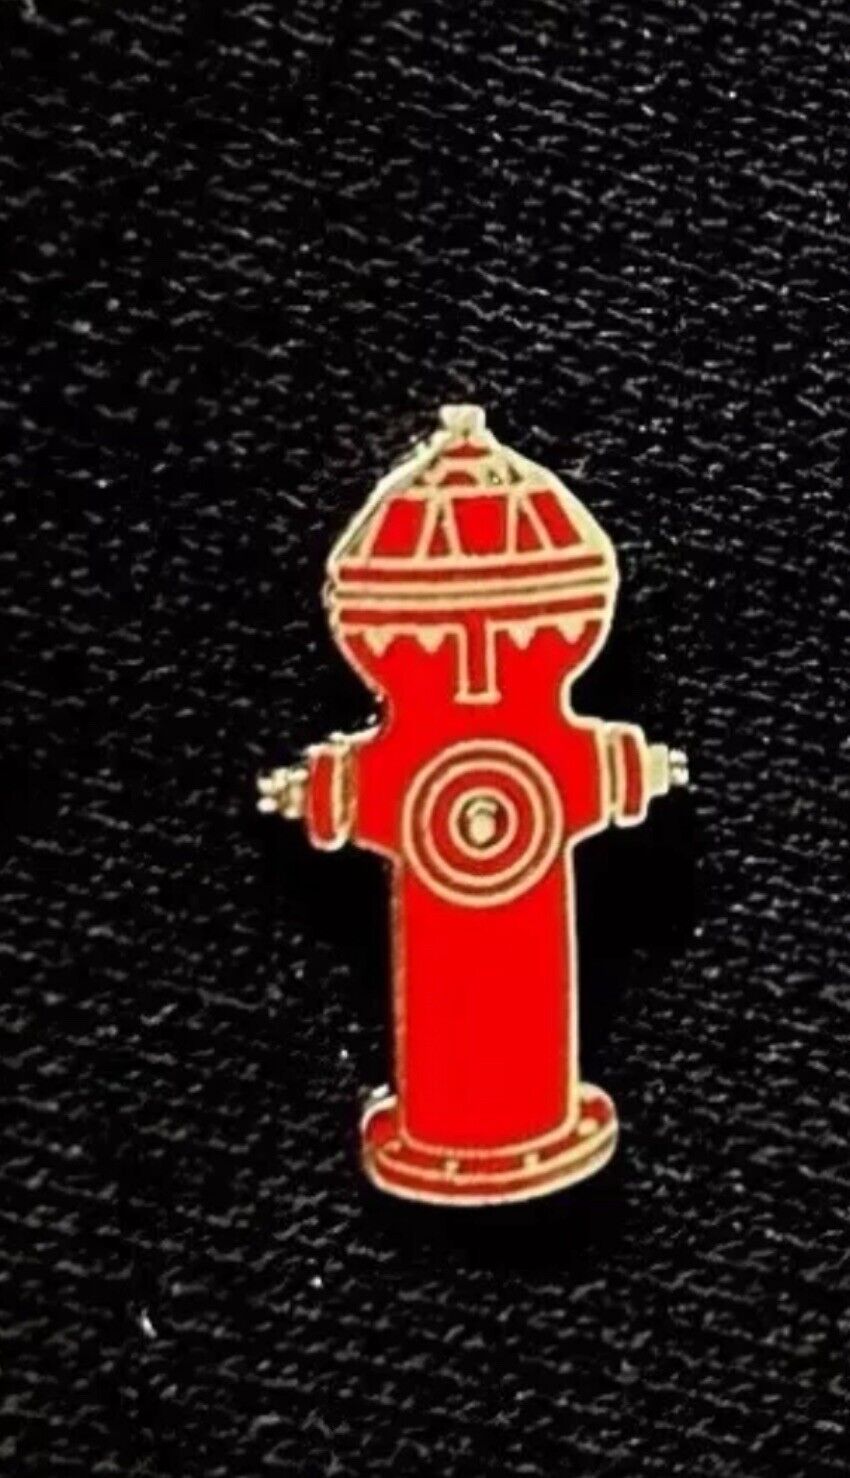 3/4-INCH FIRE HYDRANT HAT PIN LAPEL FIREFIGHTER